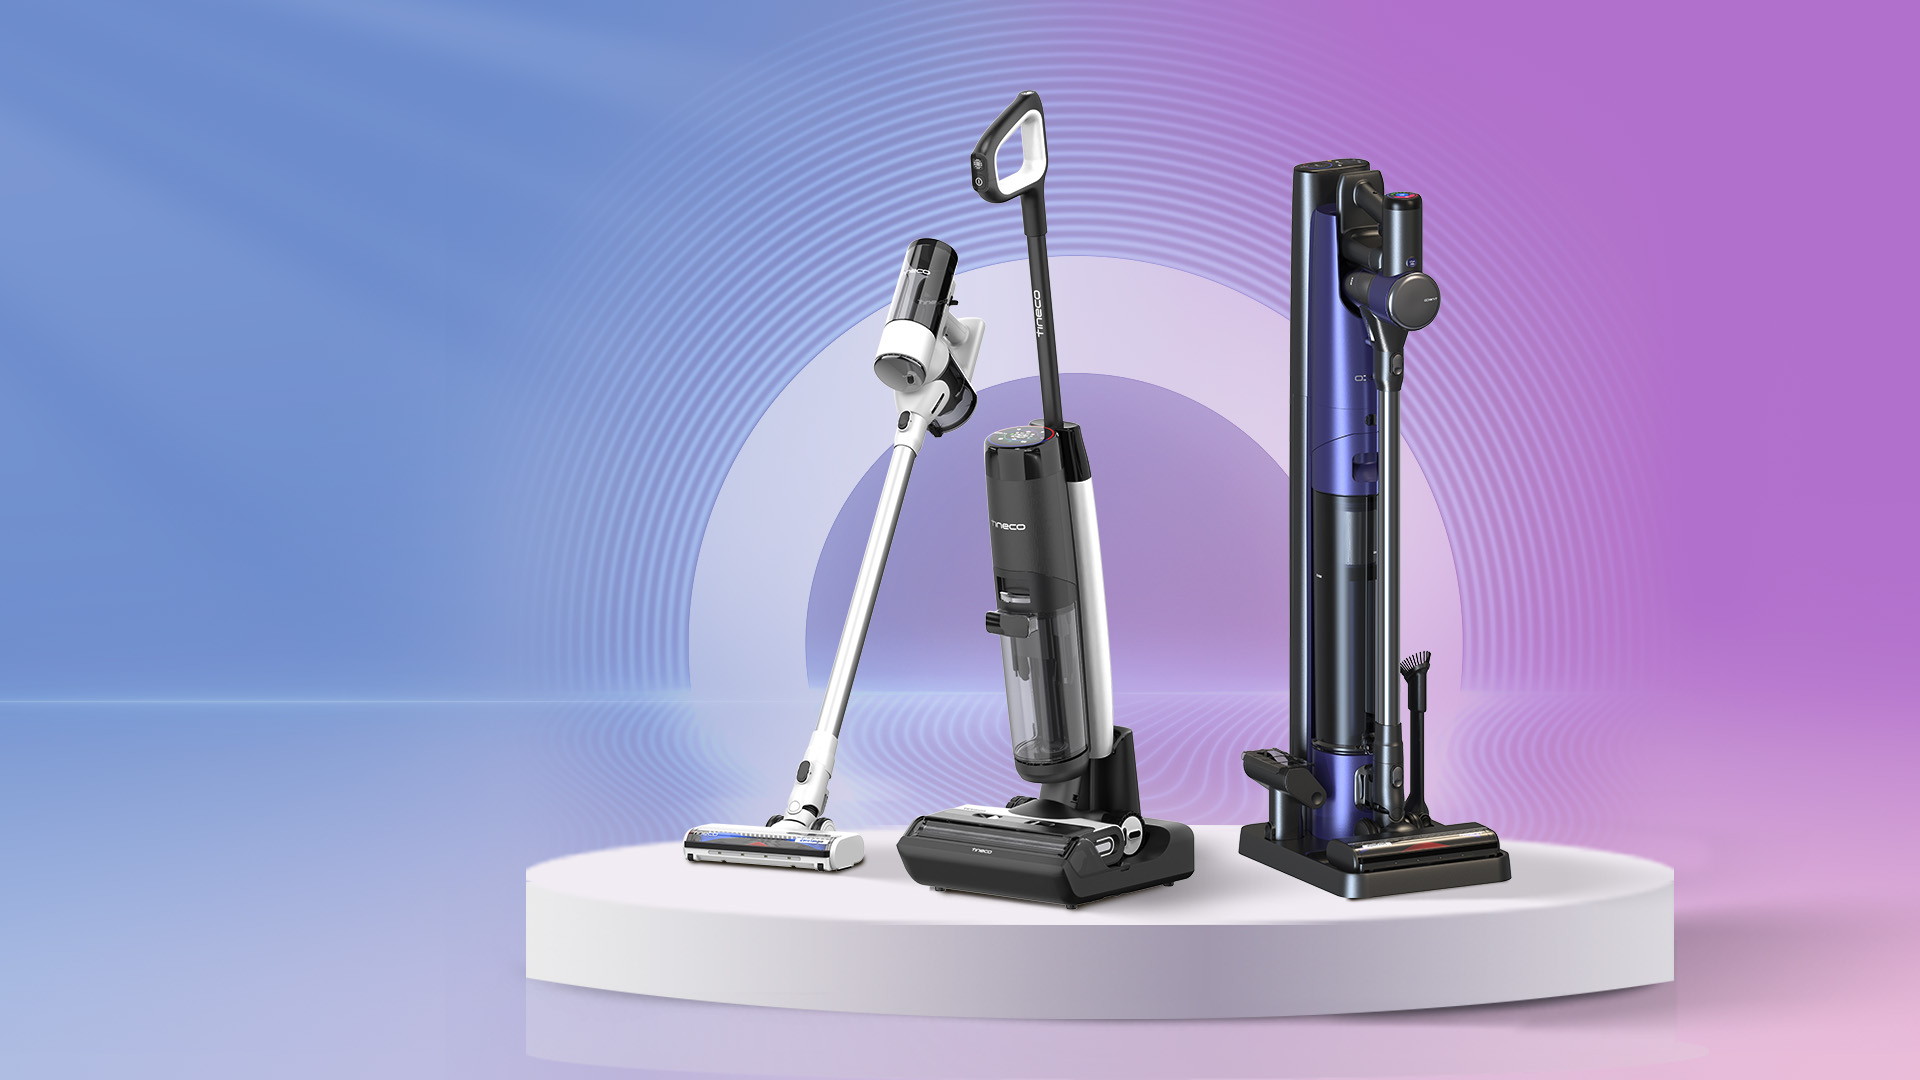 The vacuum revolution is here with the Tineco Switch S7